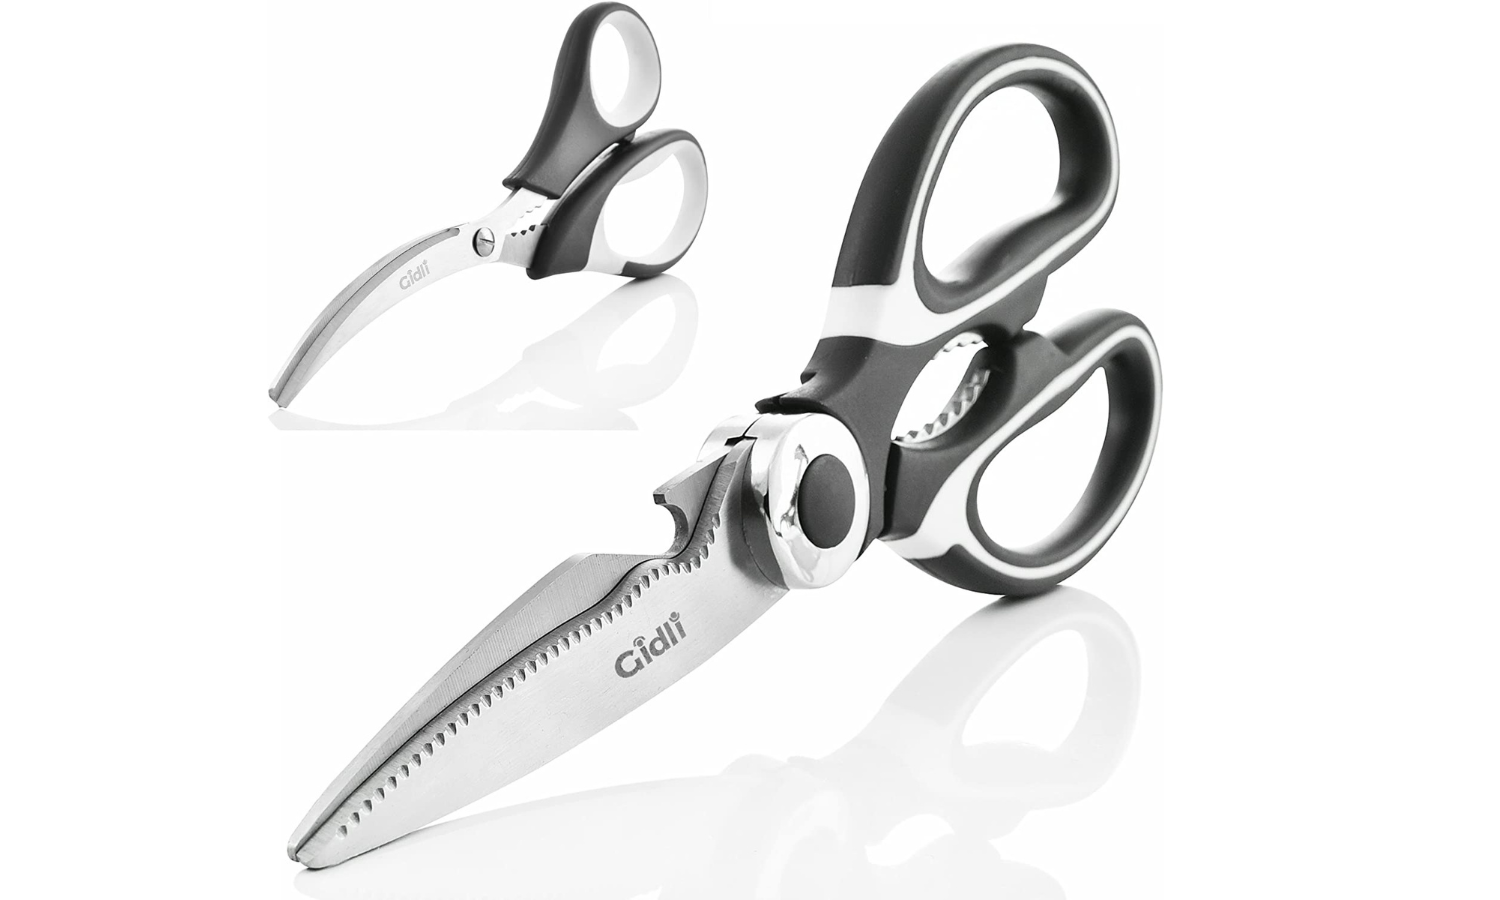 pampered chef kitchen shears 2